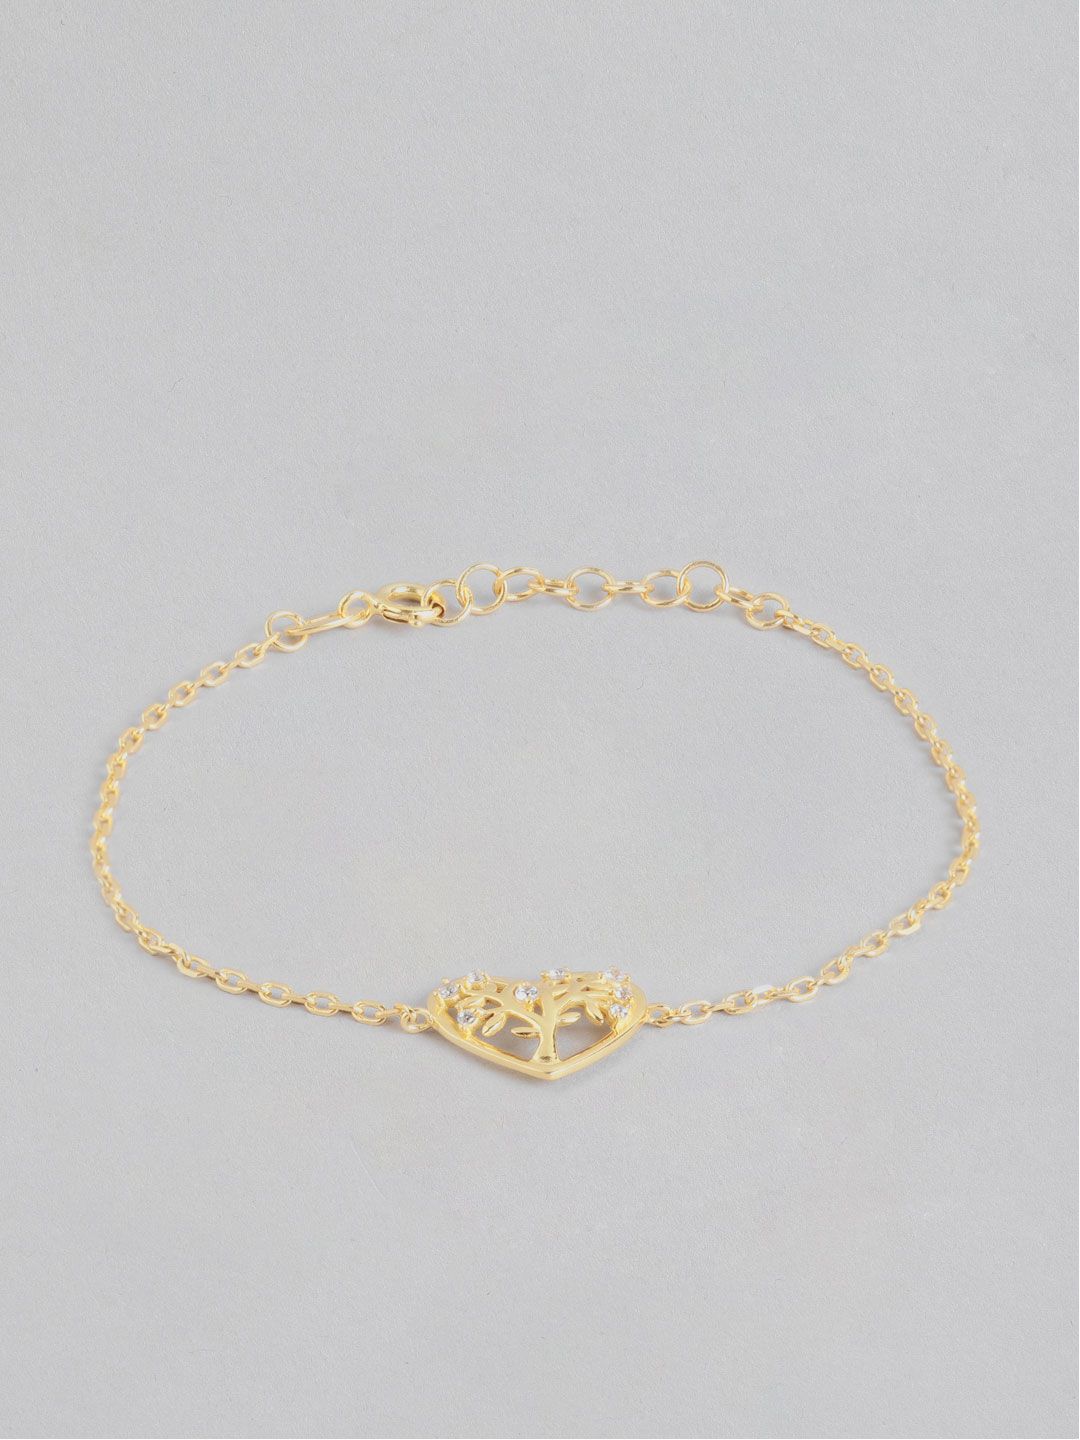 Carlton London Gold-Plated White CZ Studded Handcrafted Bracelet Price in India